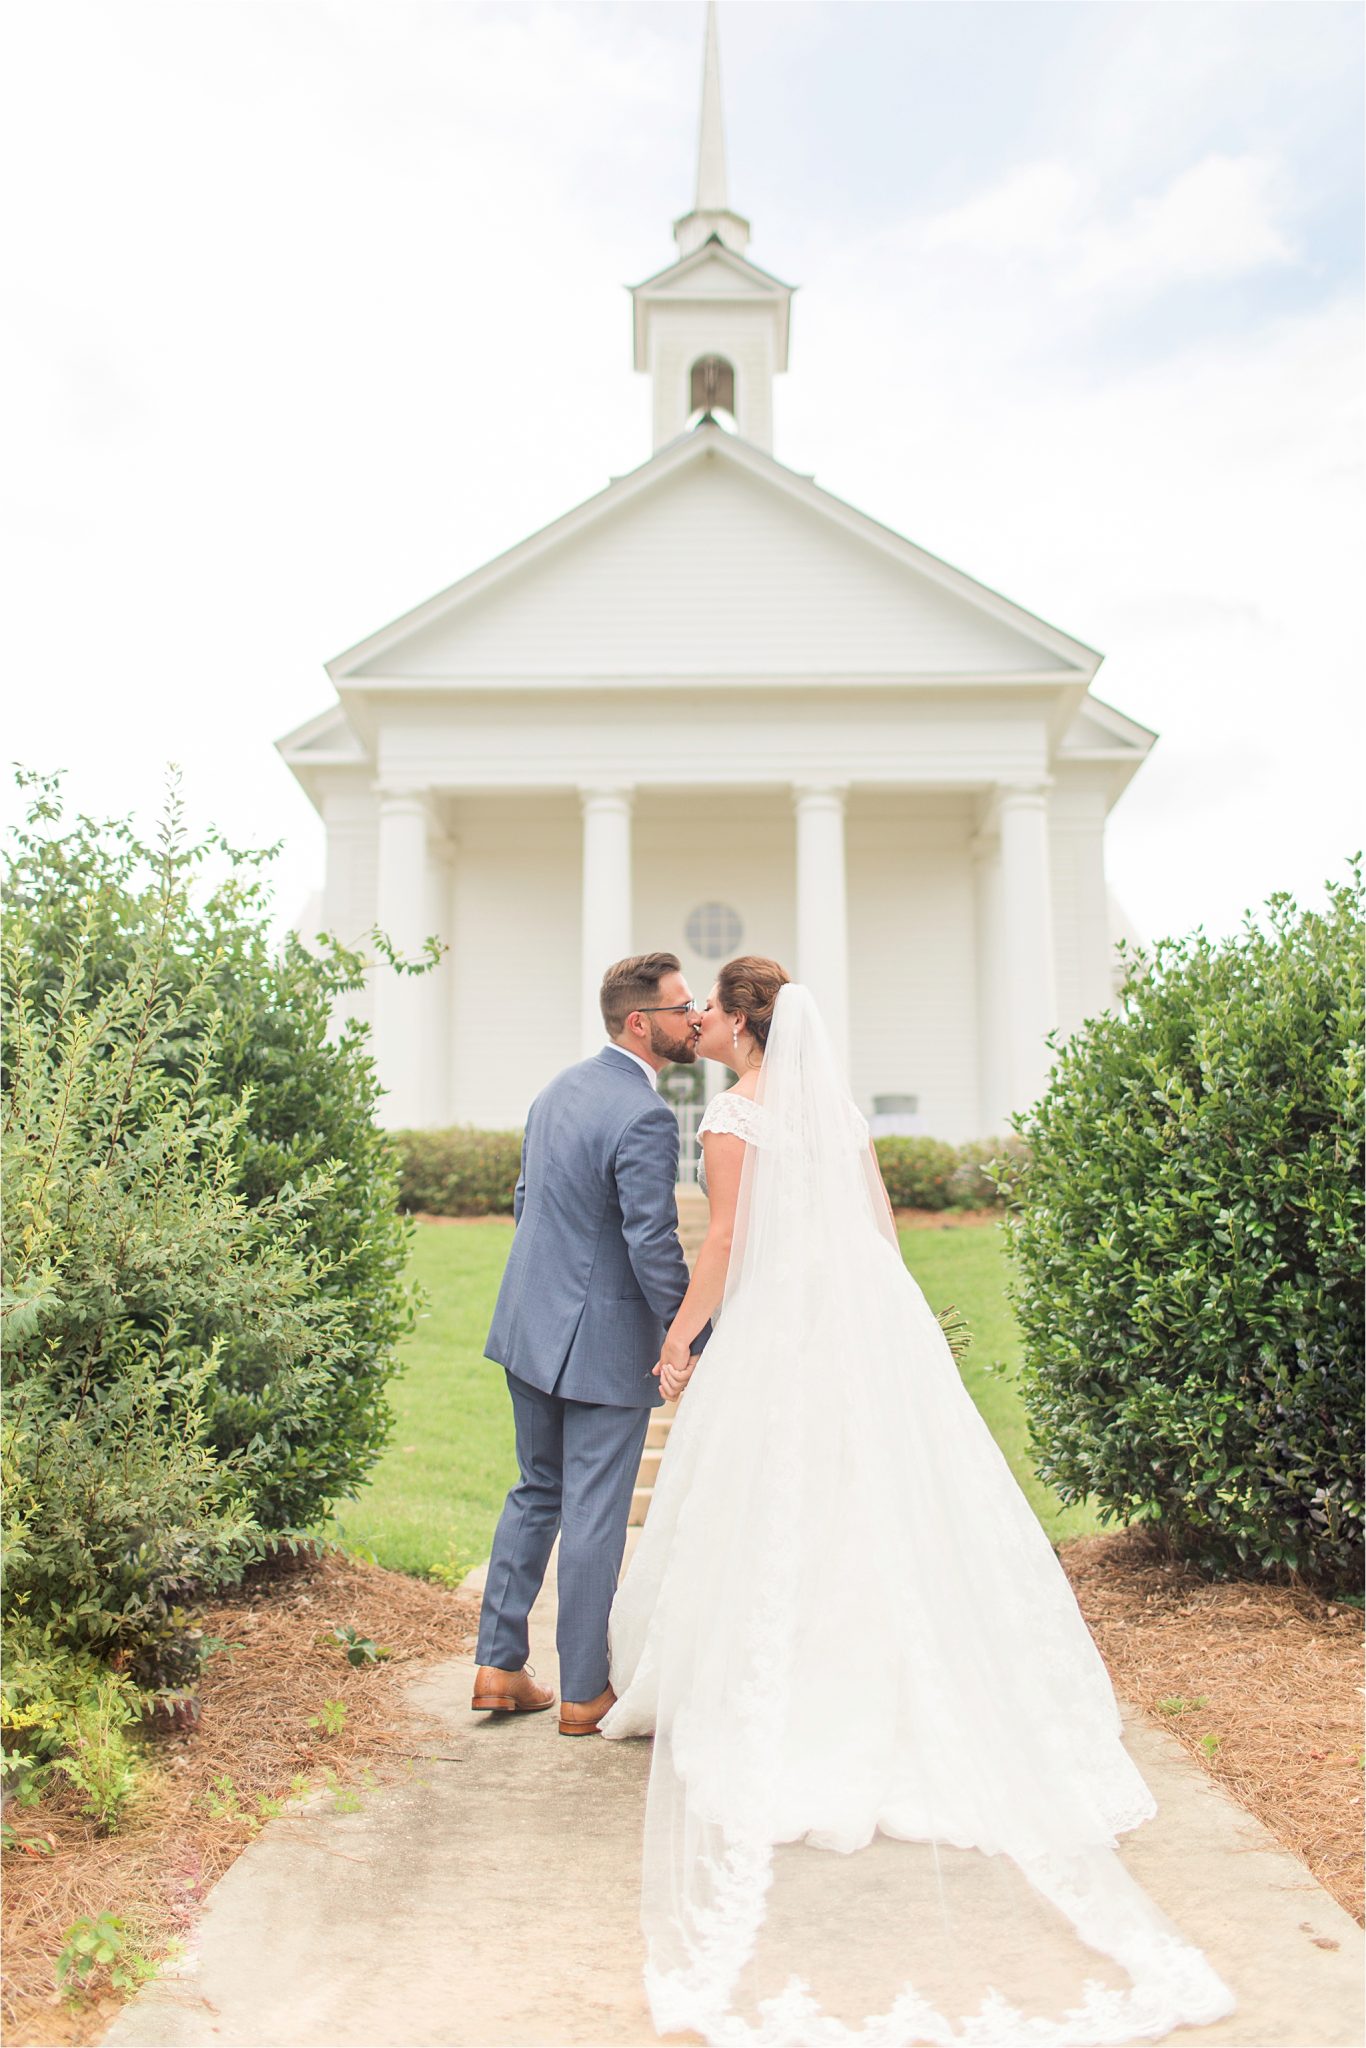 Pastel Themed Wedding-The Chapel at the Waters-Montgomery Alabama Photographer-Miles & Meredyth-Blue Themed Wedding-Navy Blue Groom Attire-Wedding Dress